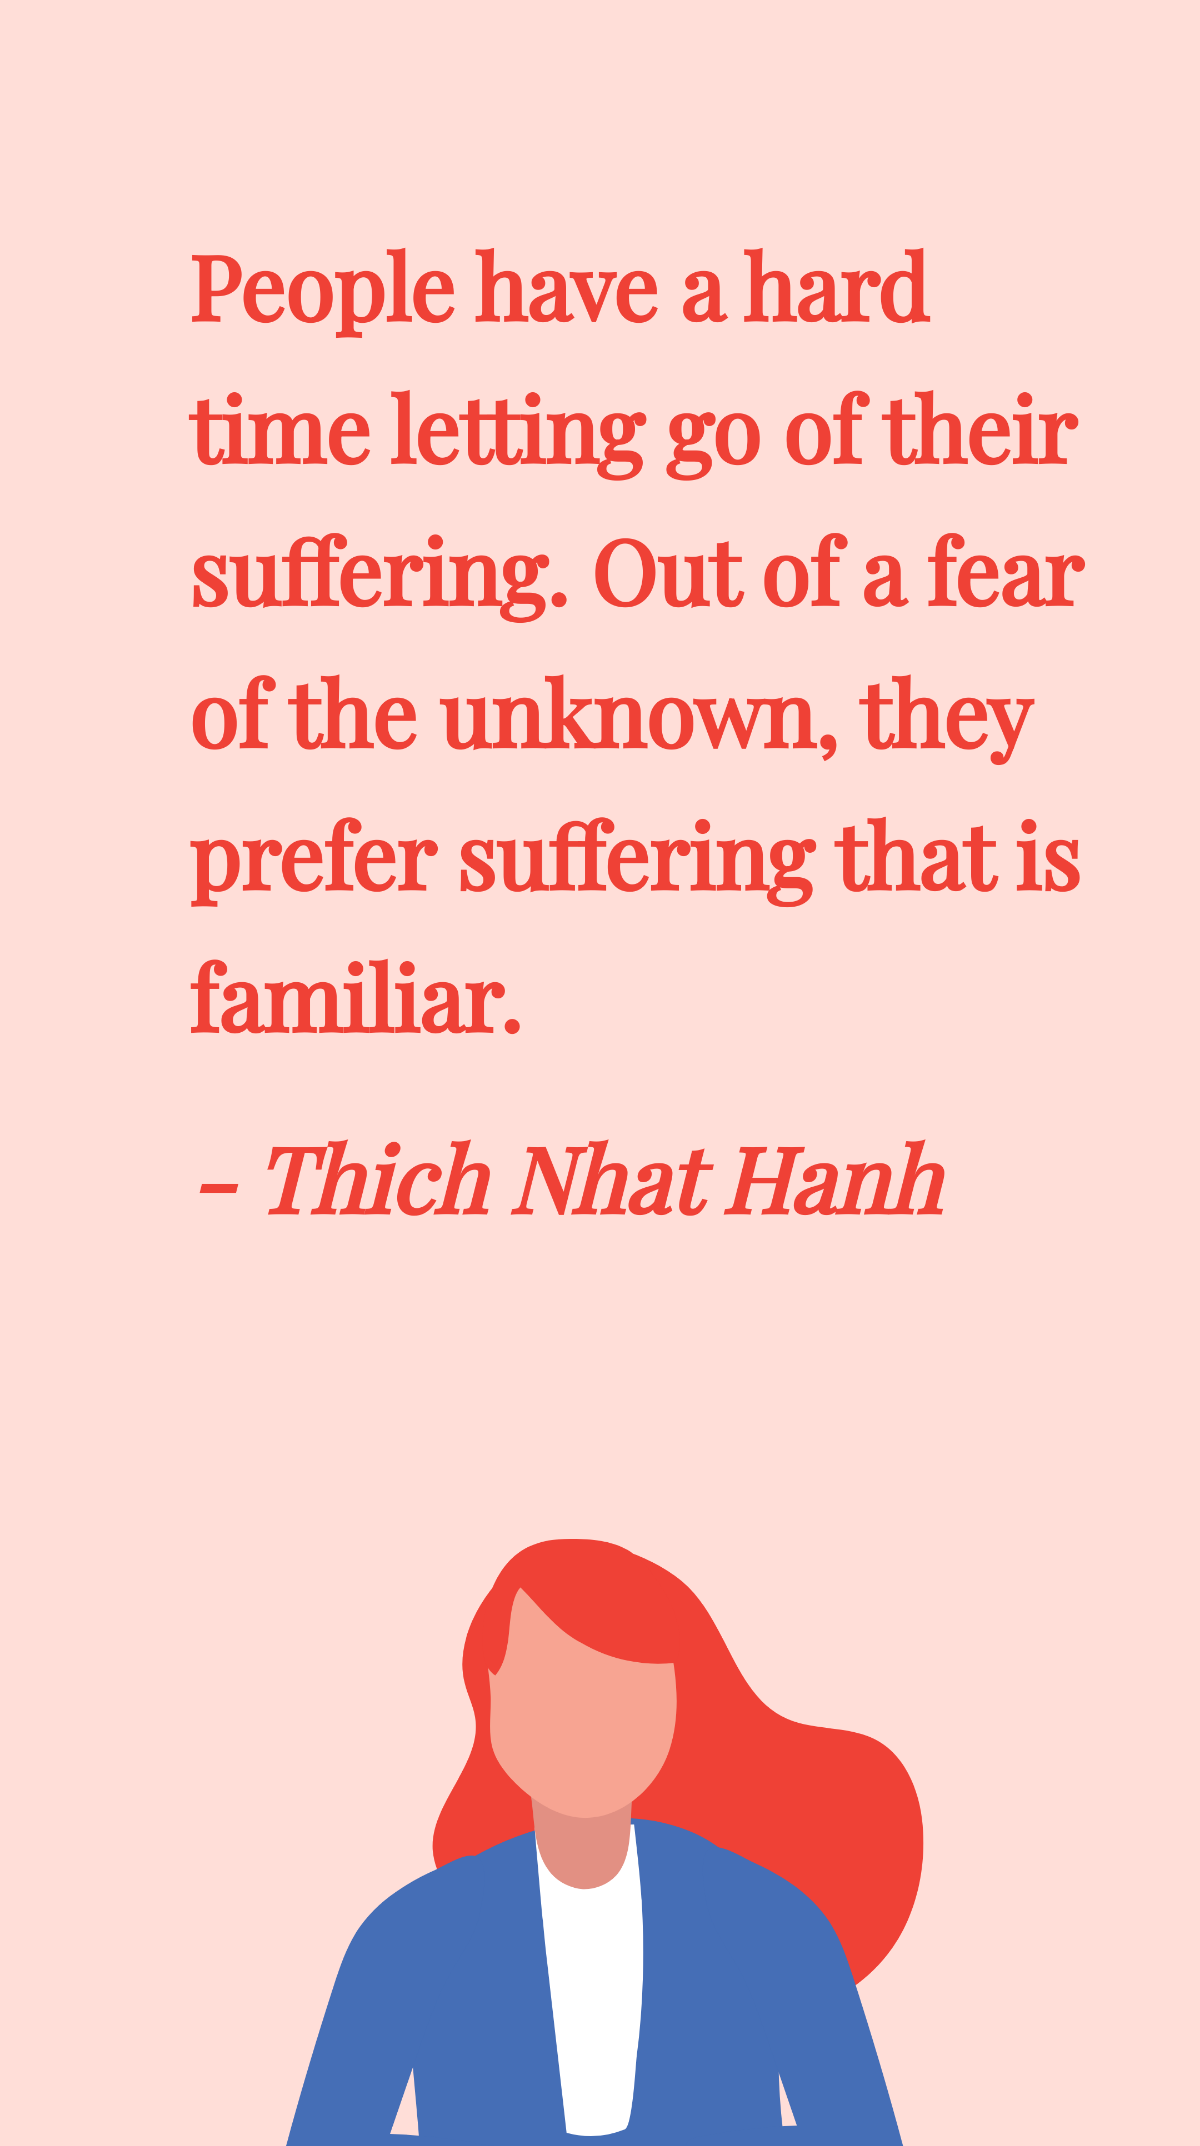 Free Thich Nhat Hanh - People have a hard time letting go of their suffering. Out of a fear of the unknown, they prefer suffering that is familiar. Template